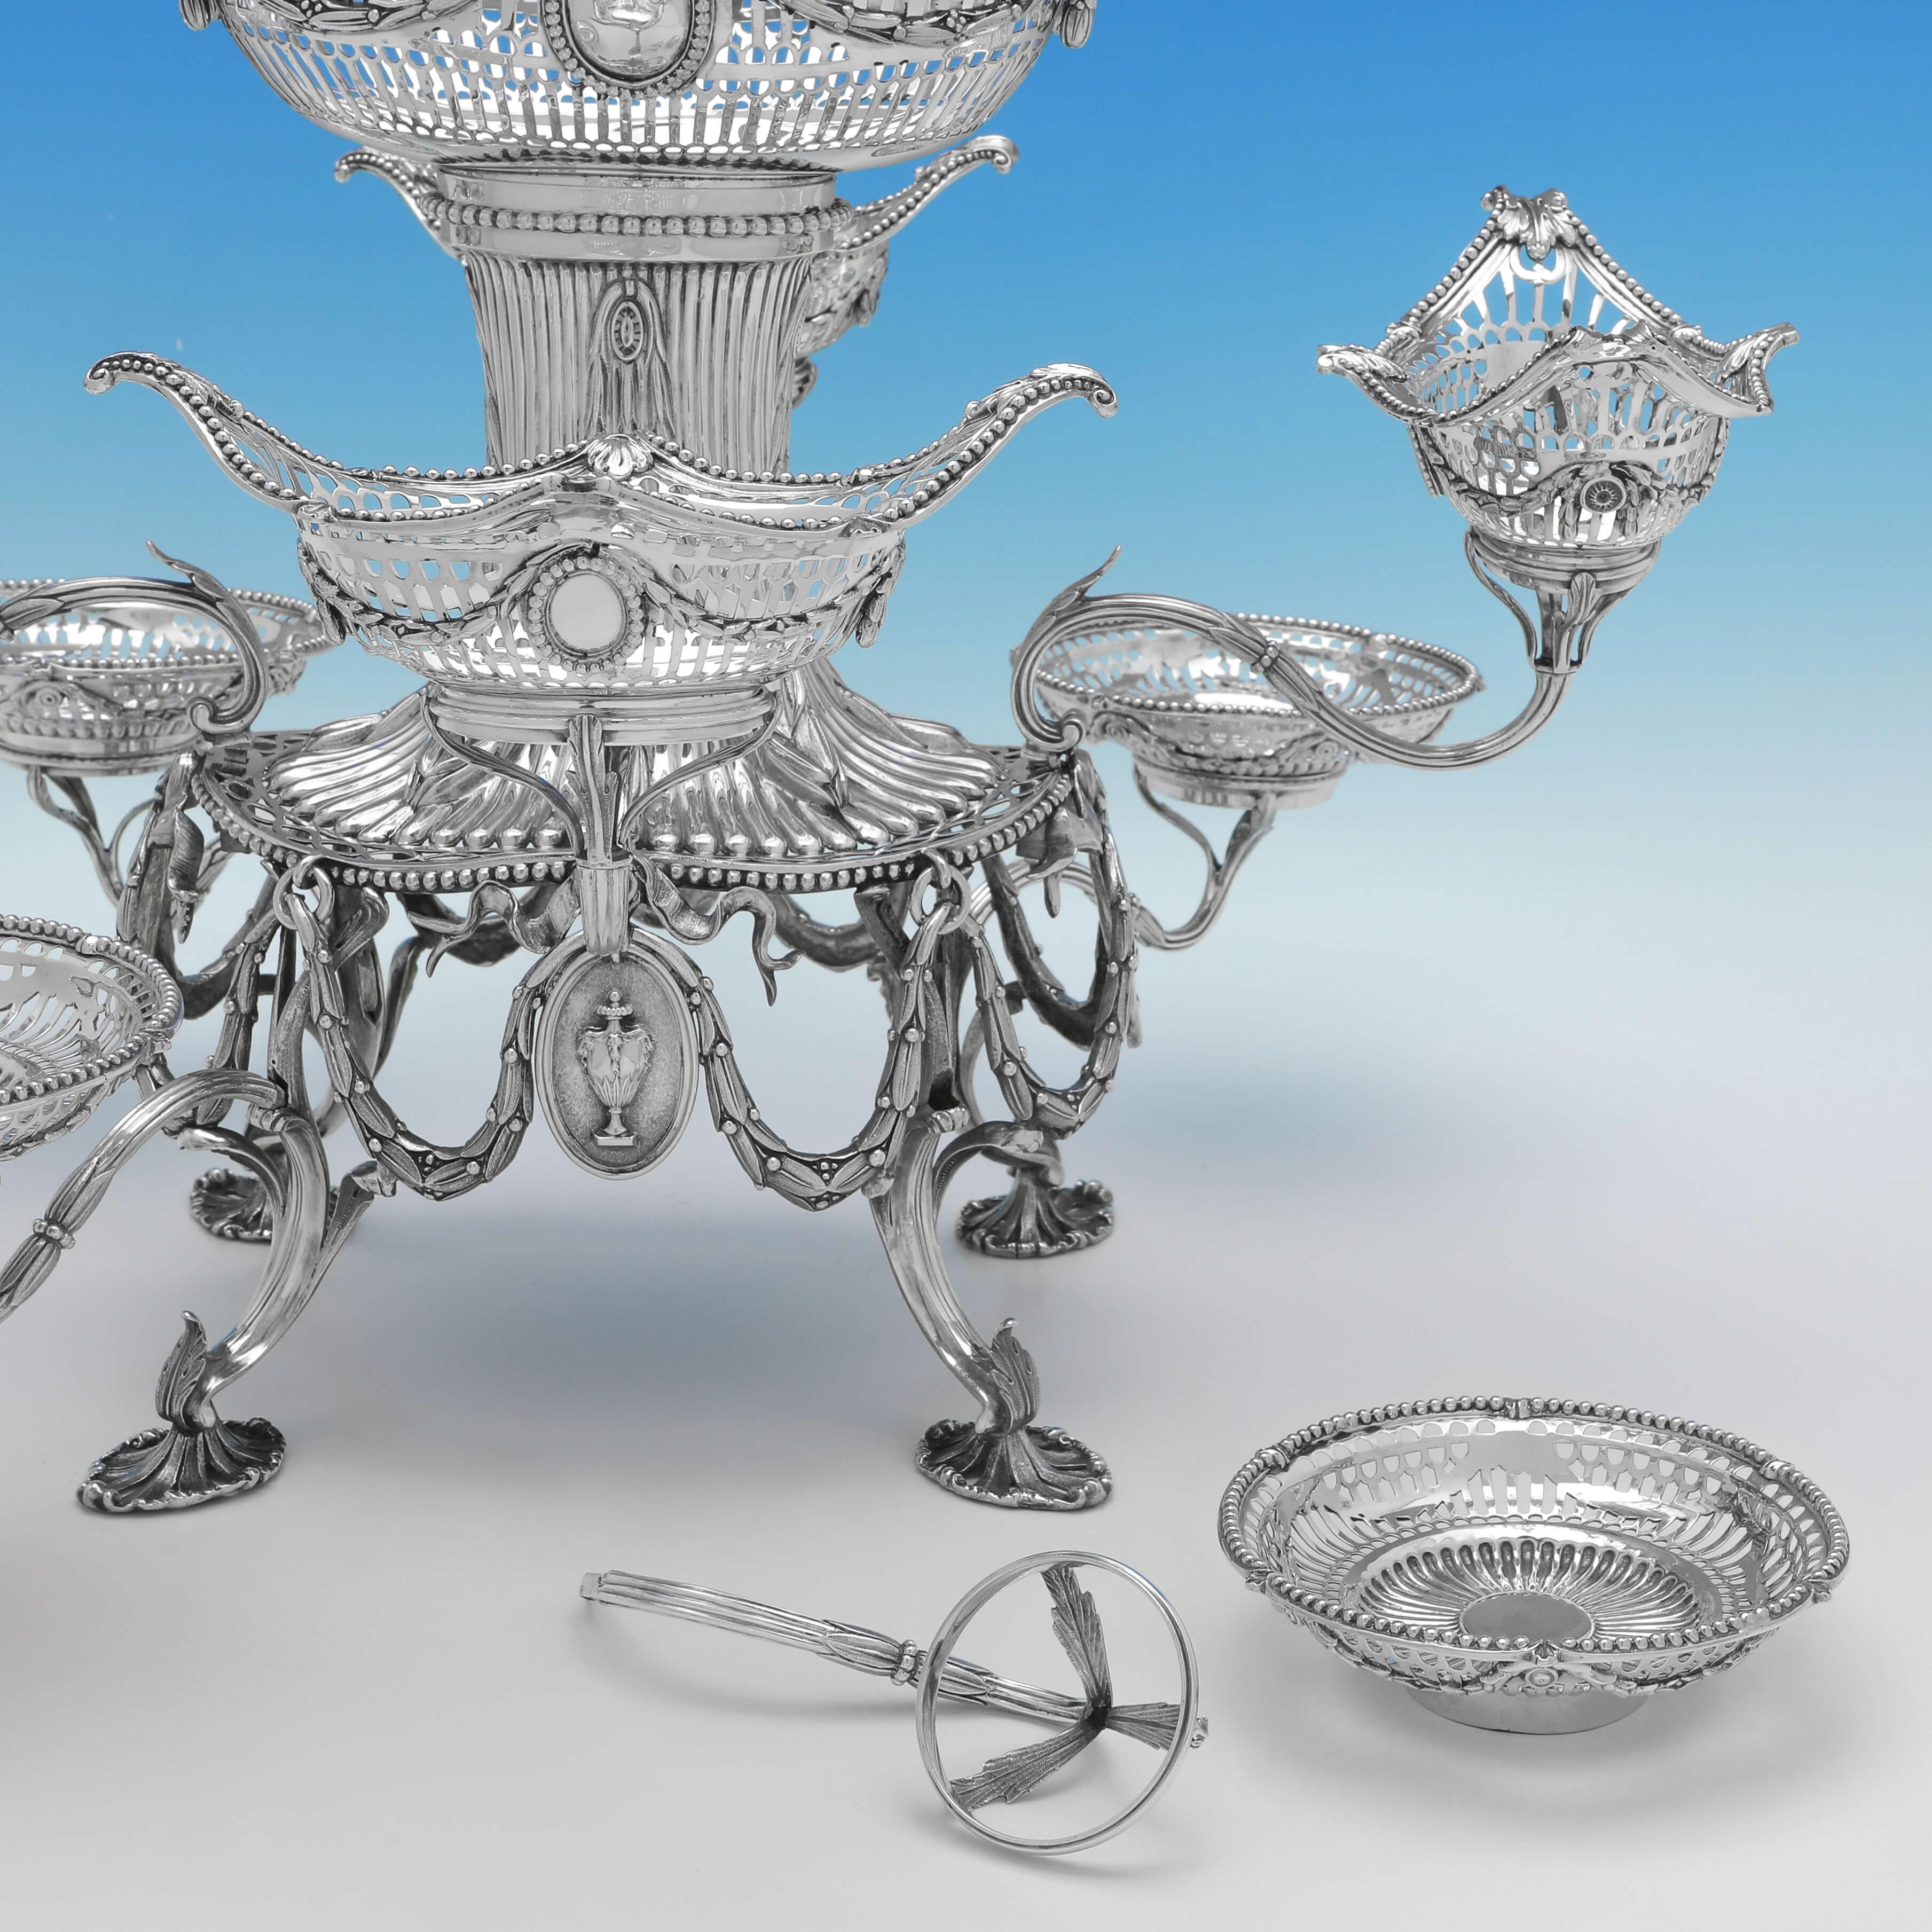 Neoclassical Victorian Antique Sterling Silver Centrepiece or Epergne, 1892 For Sale 1